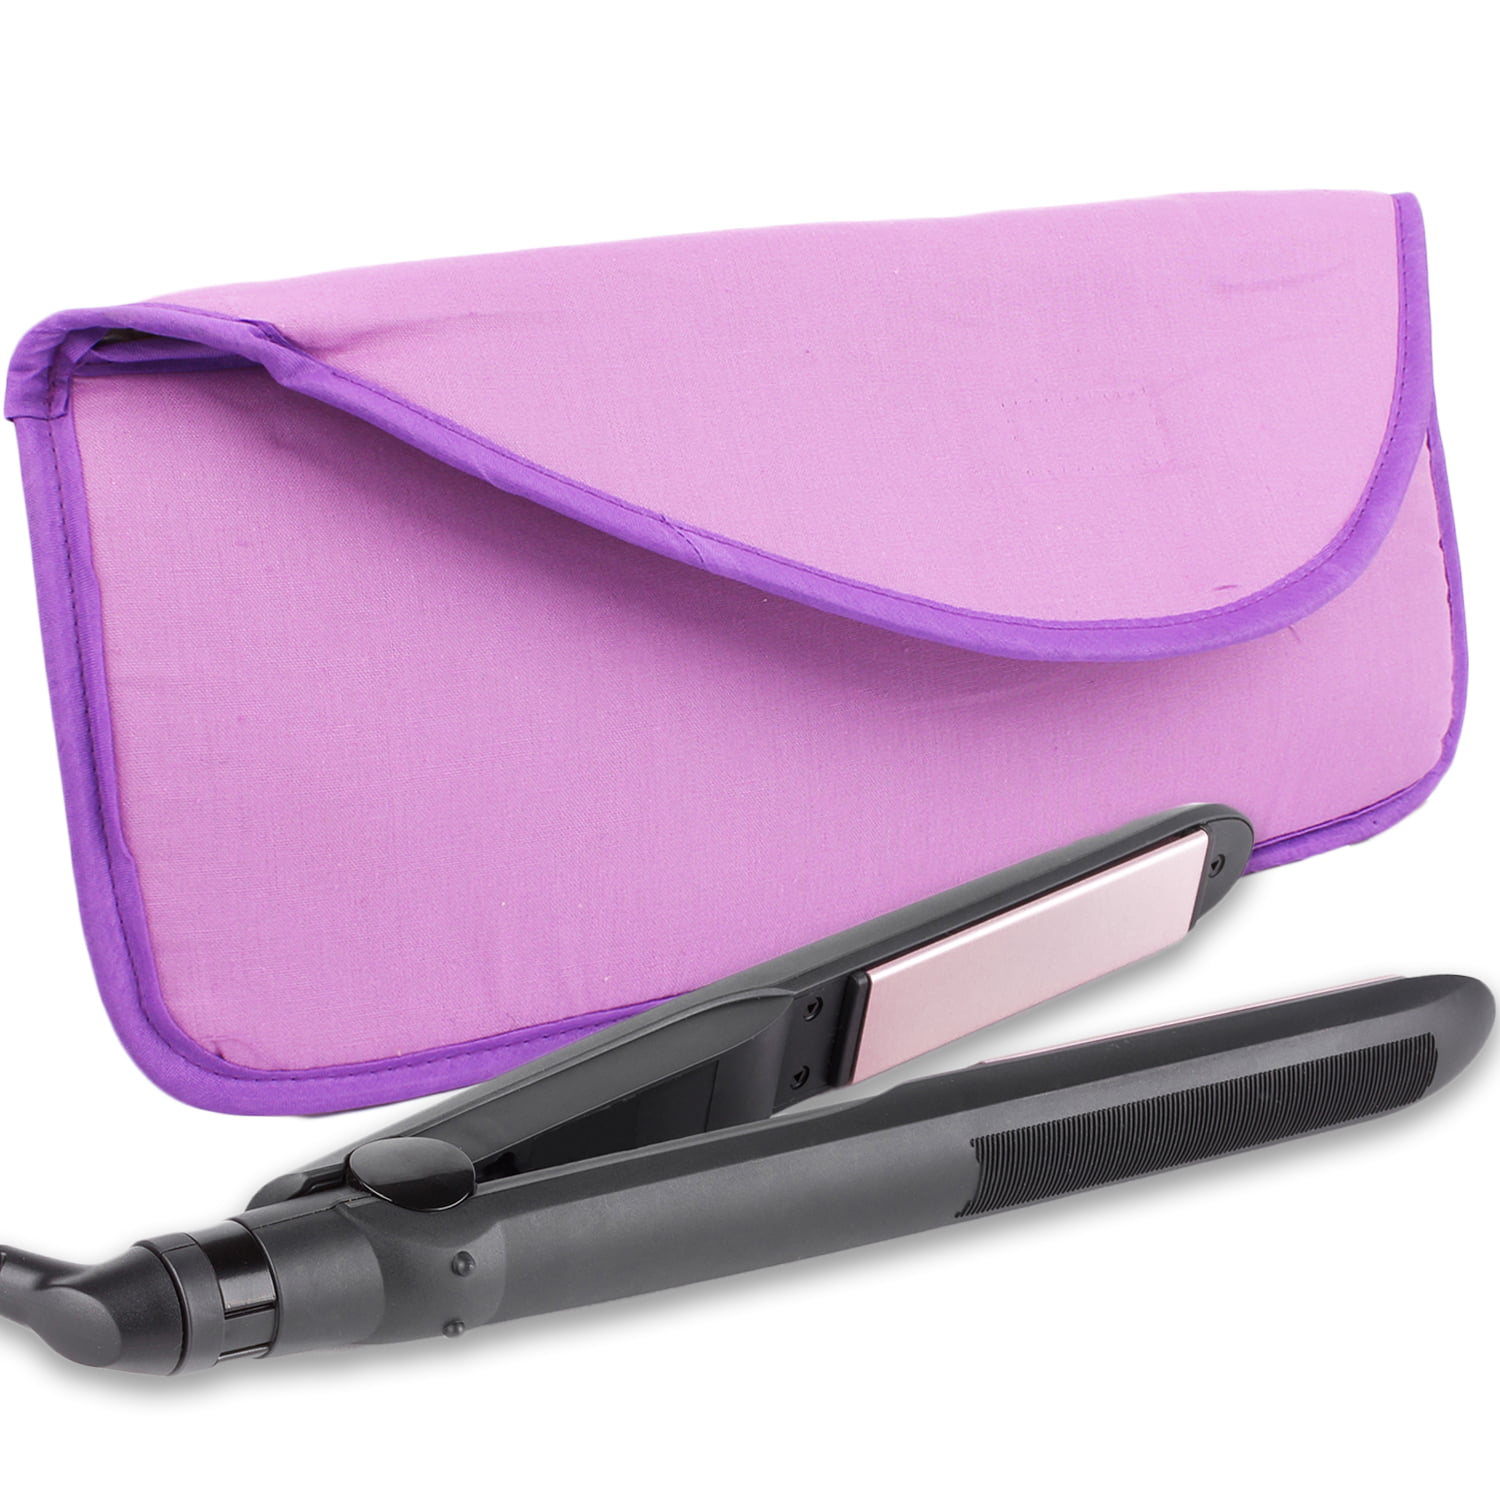 Portable Hot Flat Iron Hair Styling Tools Travel Case by bogo Brands  (Purple) 